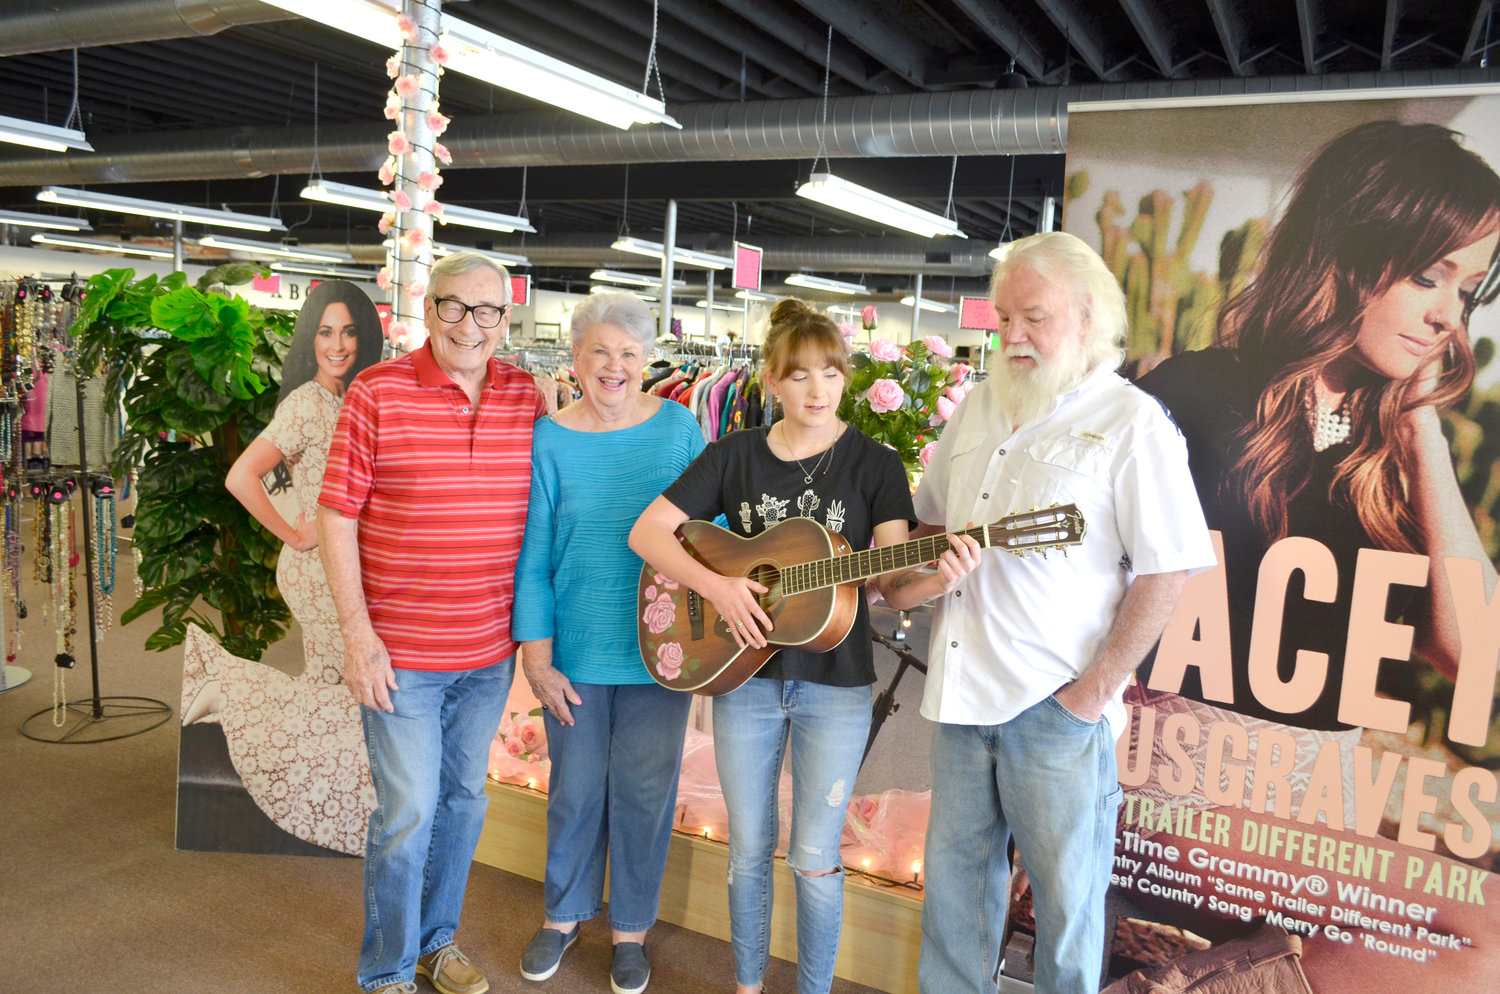 Darrell and Barbara Musgraves, left, congratulate Abby Vann and her father, Darrell Vann, on winning the Kacey Musgraves’ autogrpahed guitar at the Kindness Kottage in Mineola. Darrell bought the winning ticket and gifted the guitar to Abby, an aspiring musician.